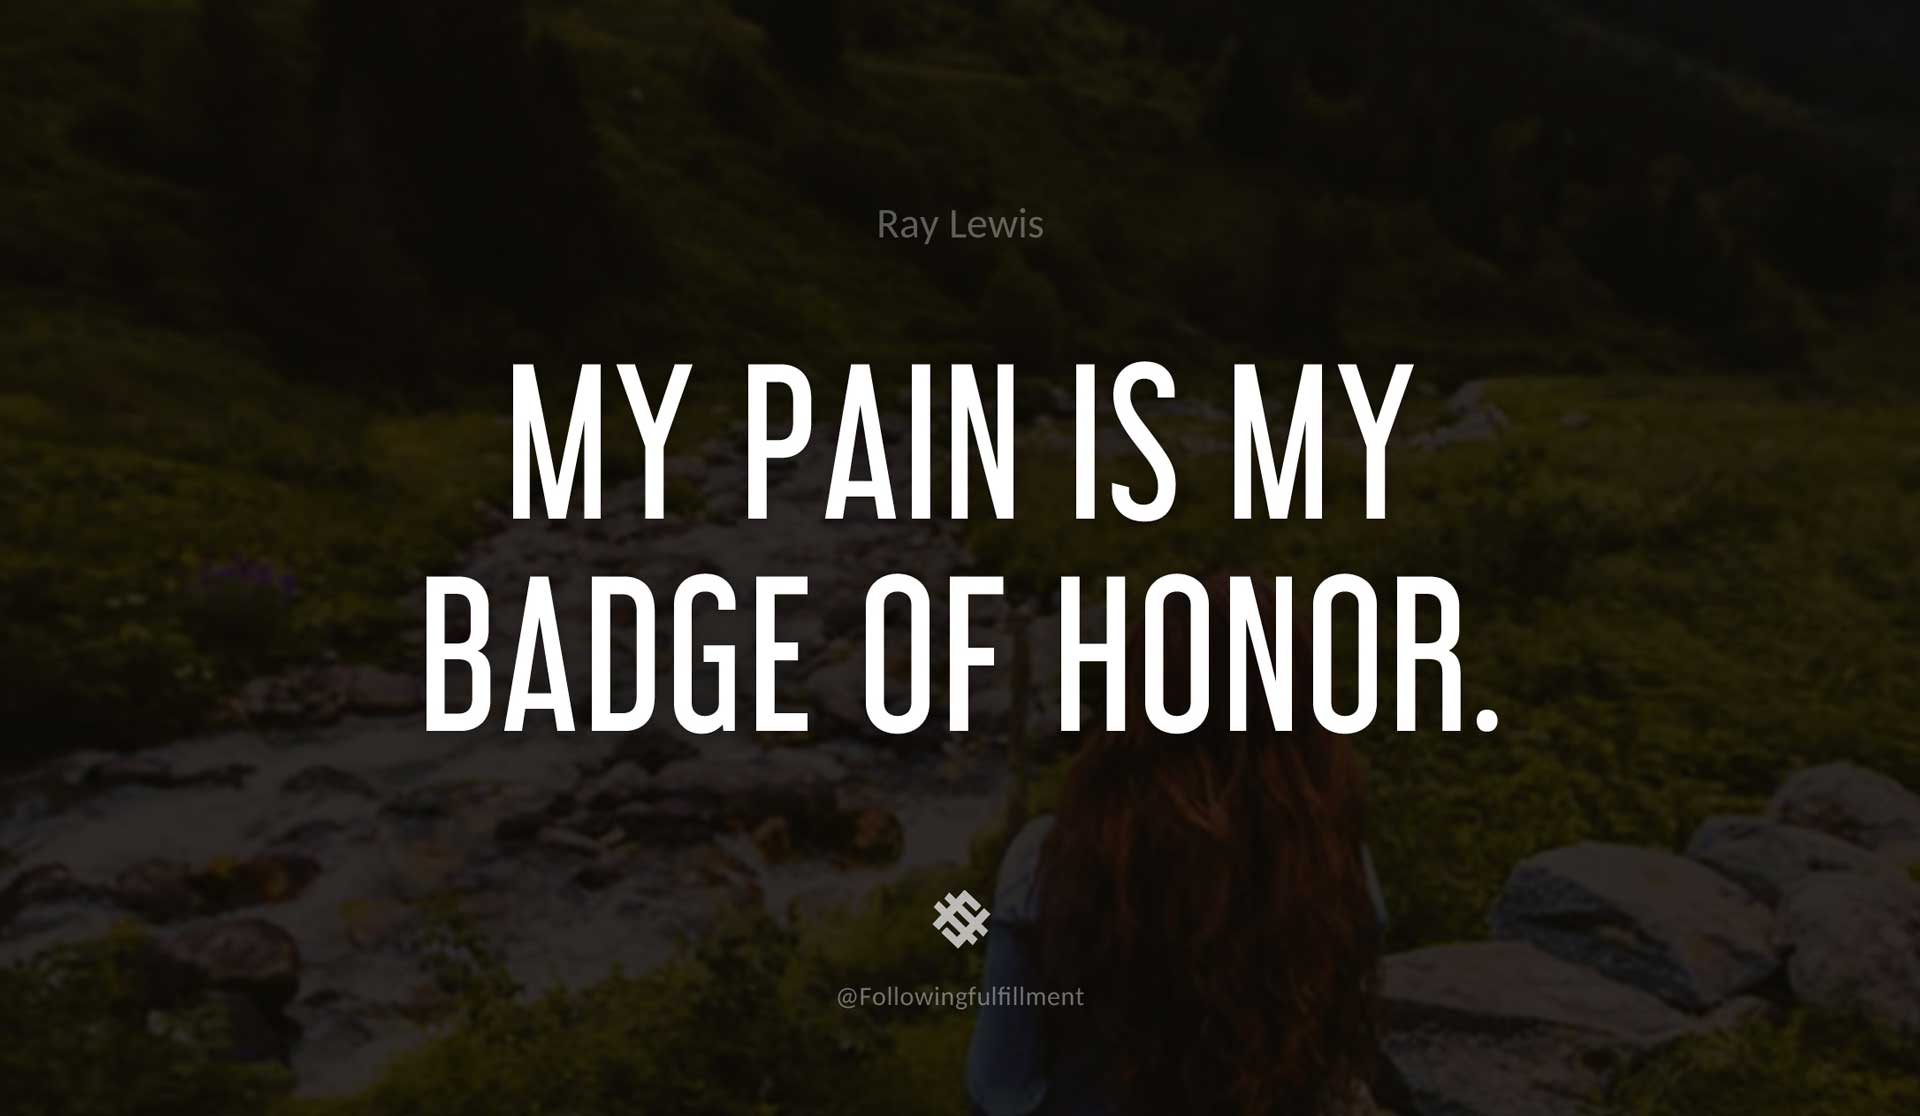 My-pain-is-my-badge-of-honor.-RAY-LEWIS-Quote.jpg